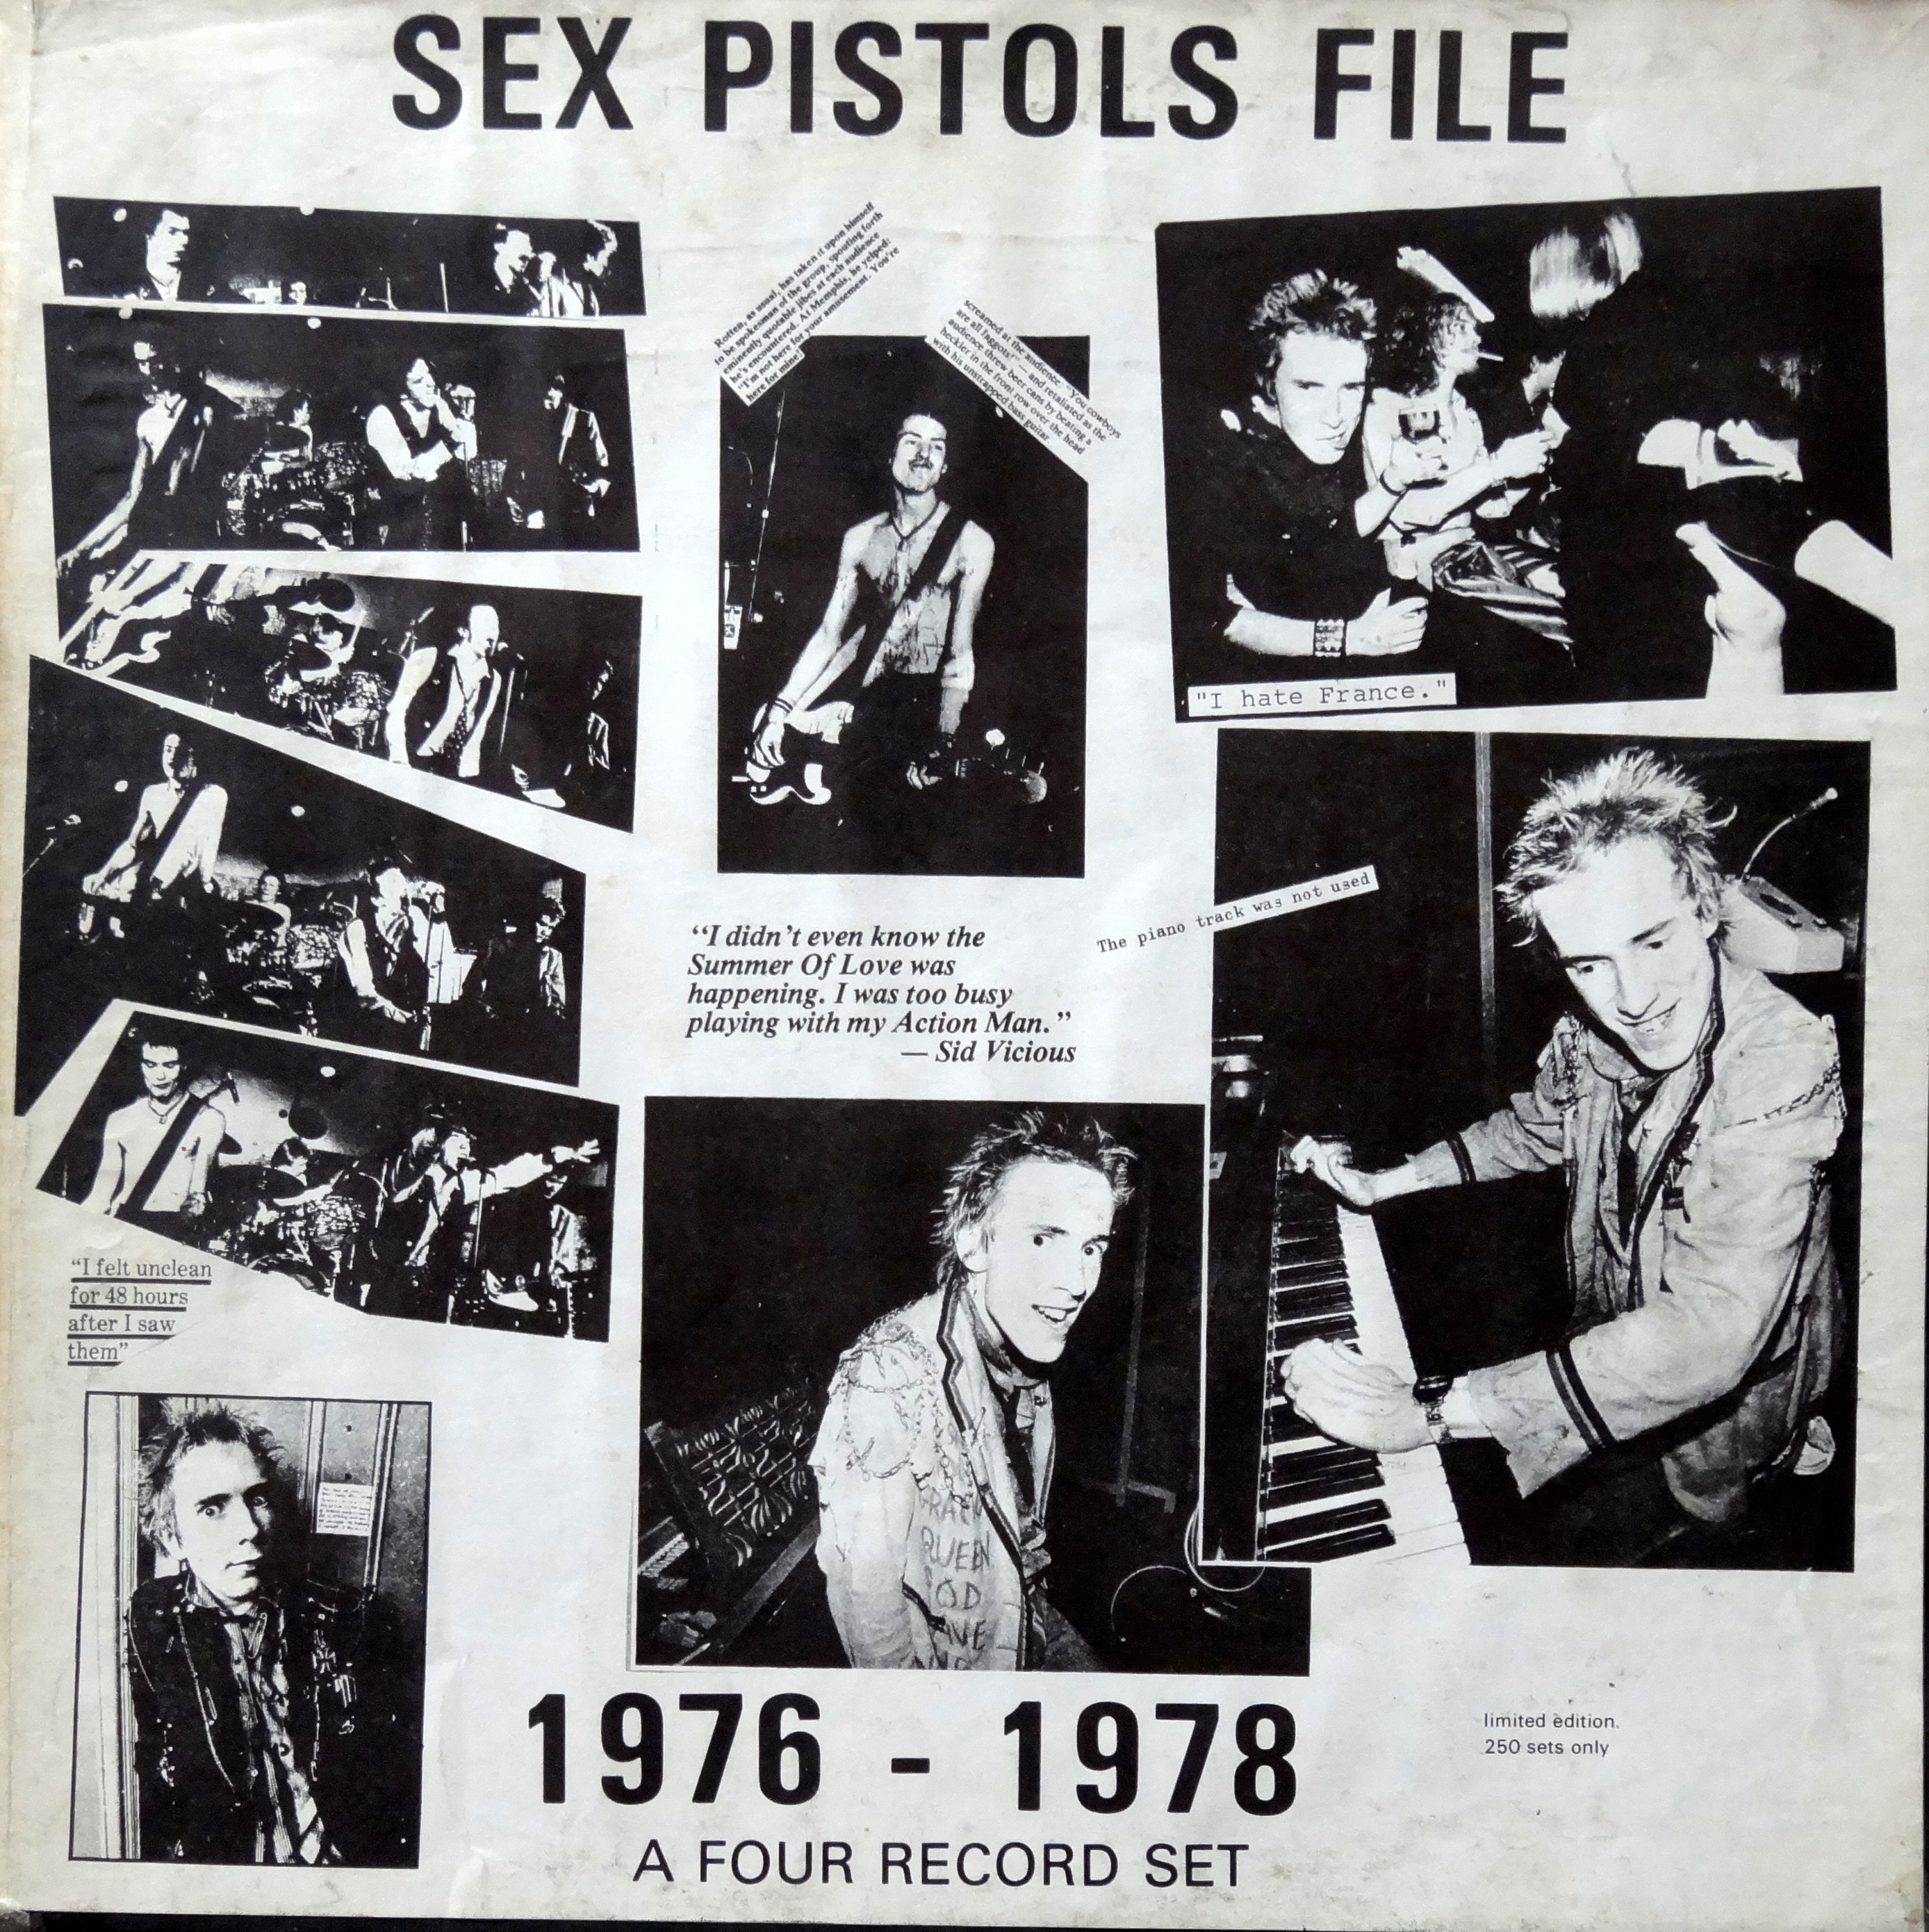 From The Stacks: 'Sex Pistols File' (Bootleg) – Why It Matters